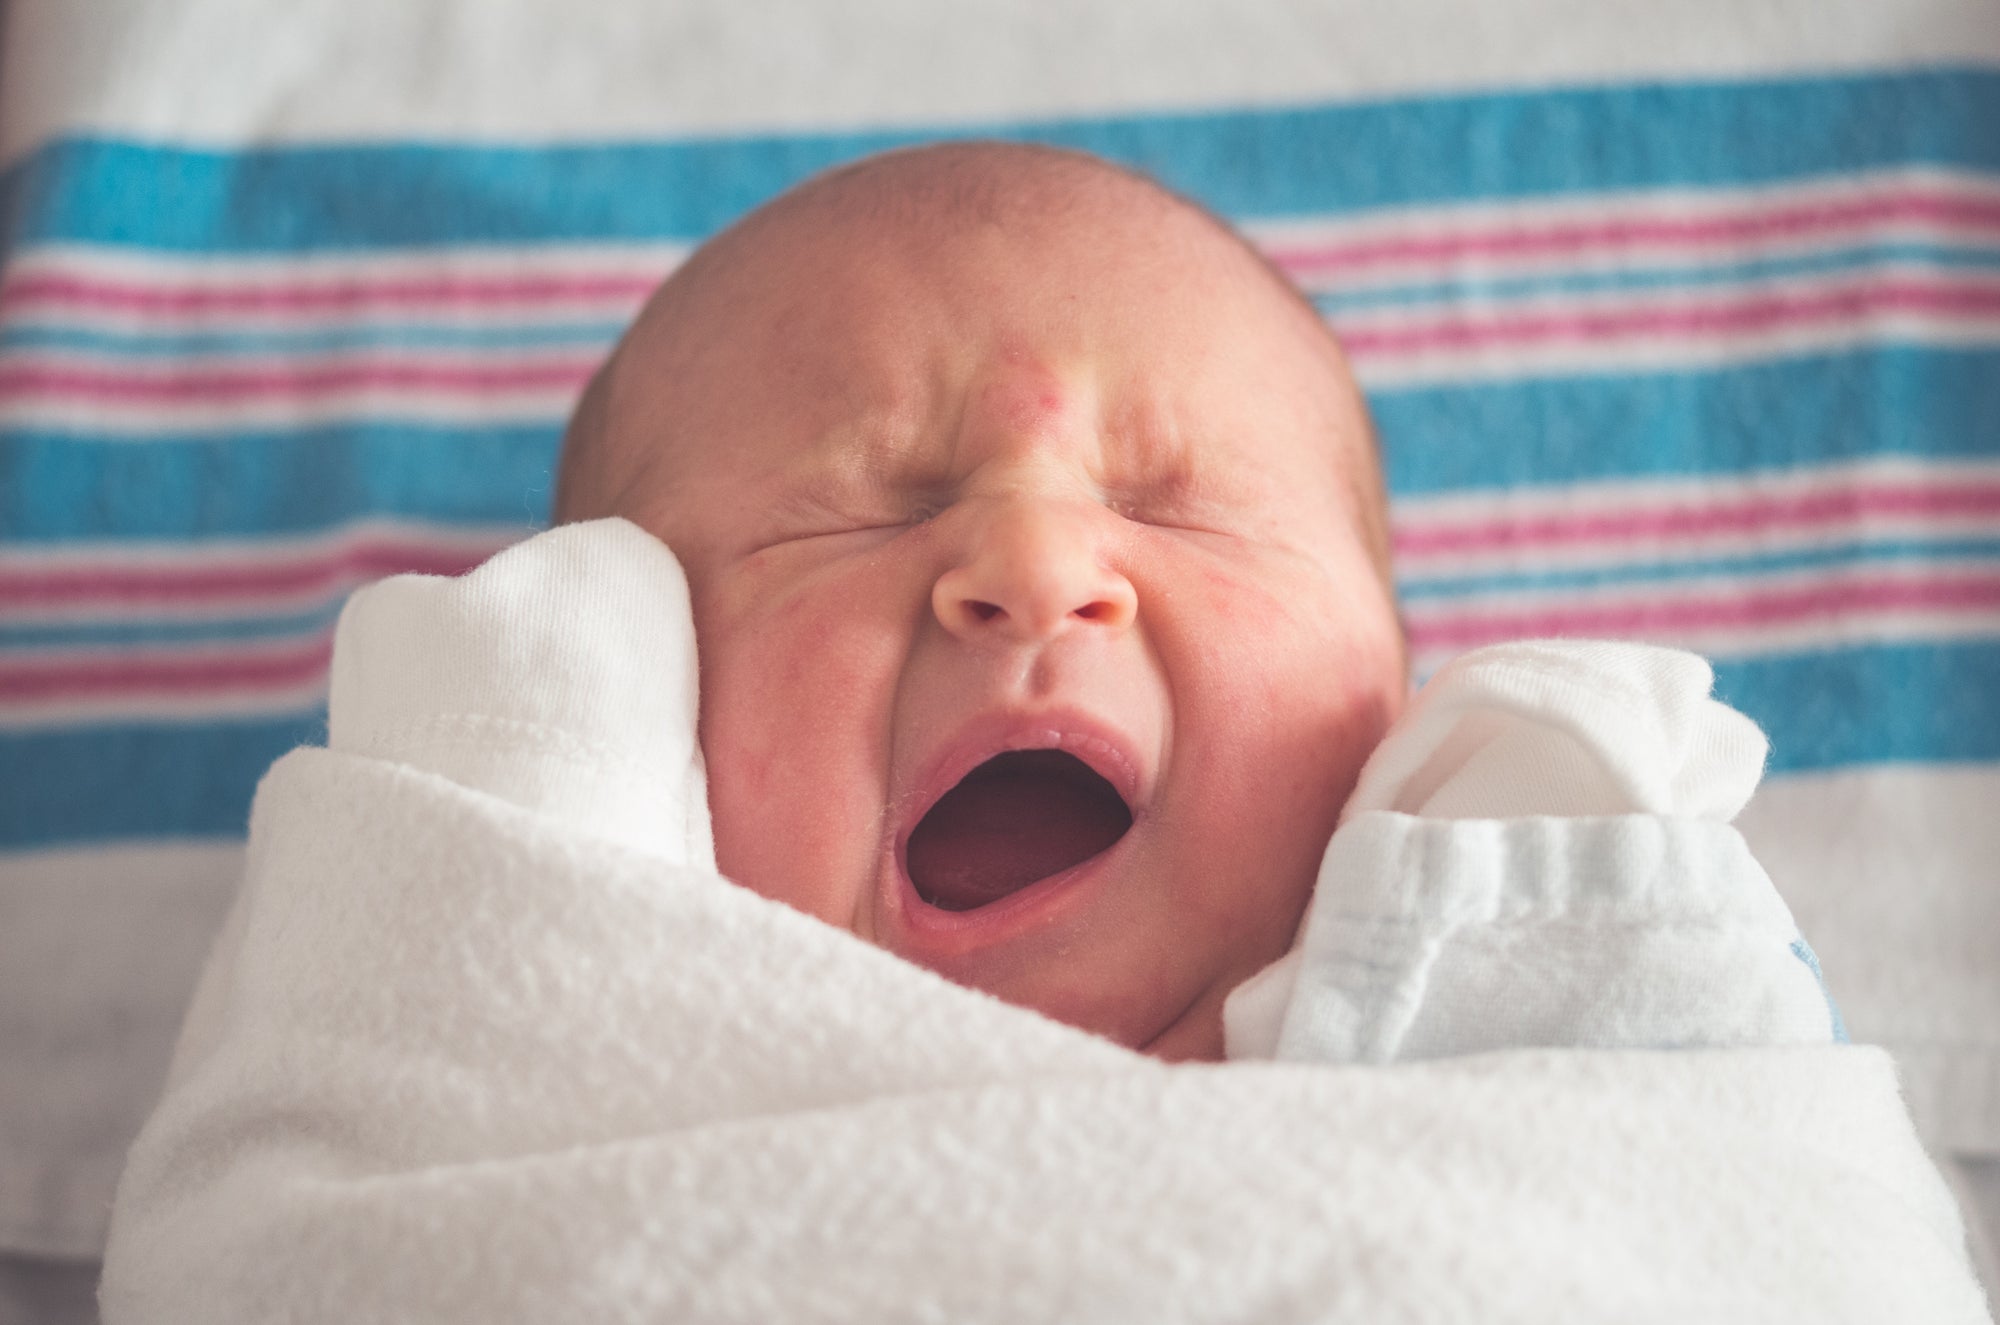 Do This To Stop Your Baby Crying From Colic or Reflux